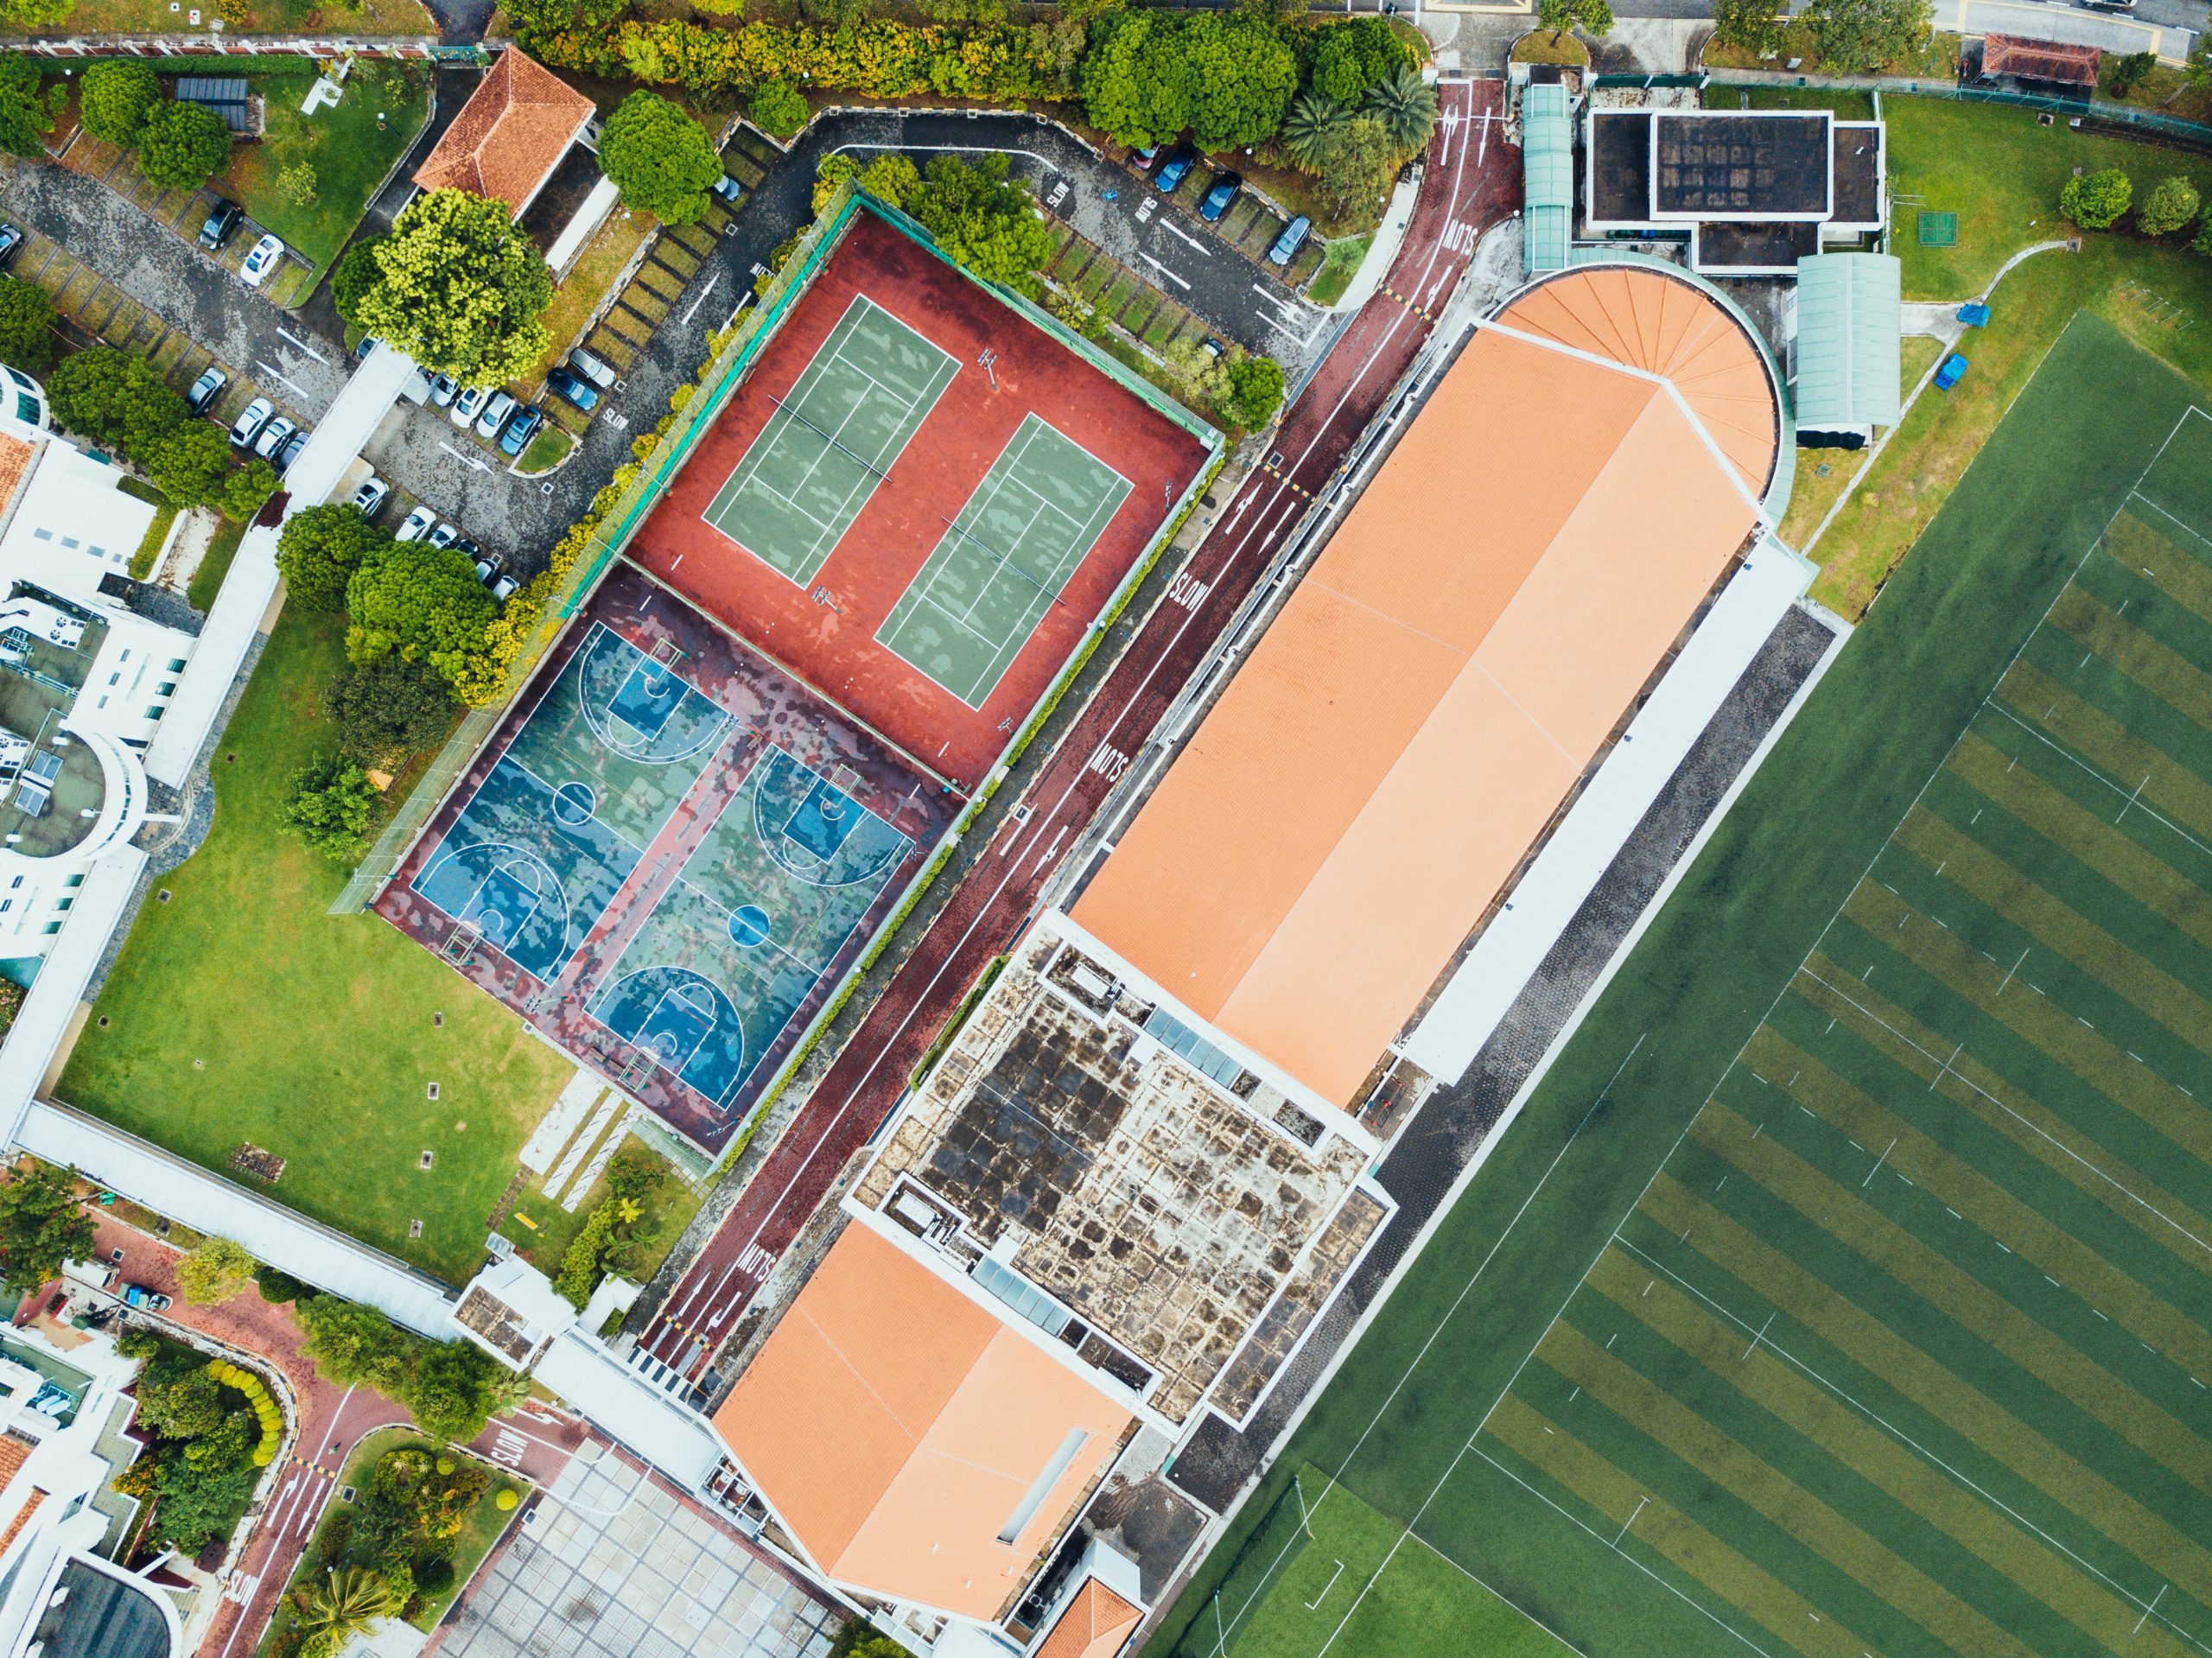 School building roof - how often do you need to replace a roof?